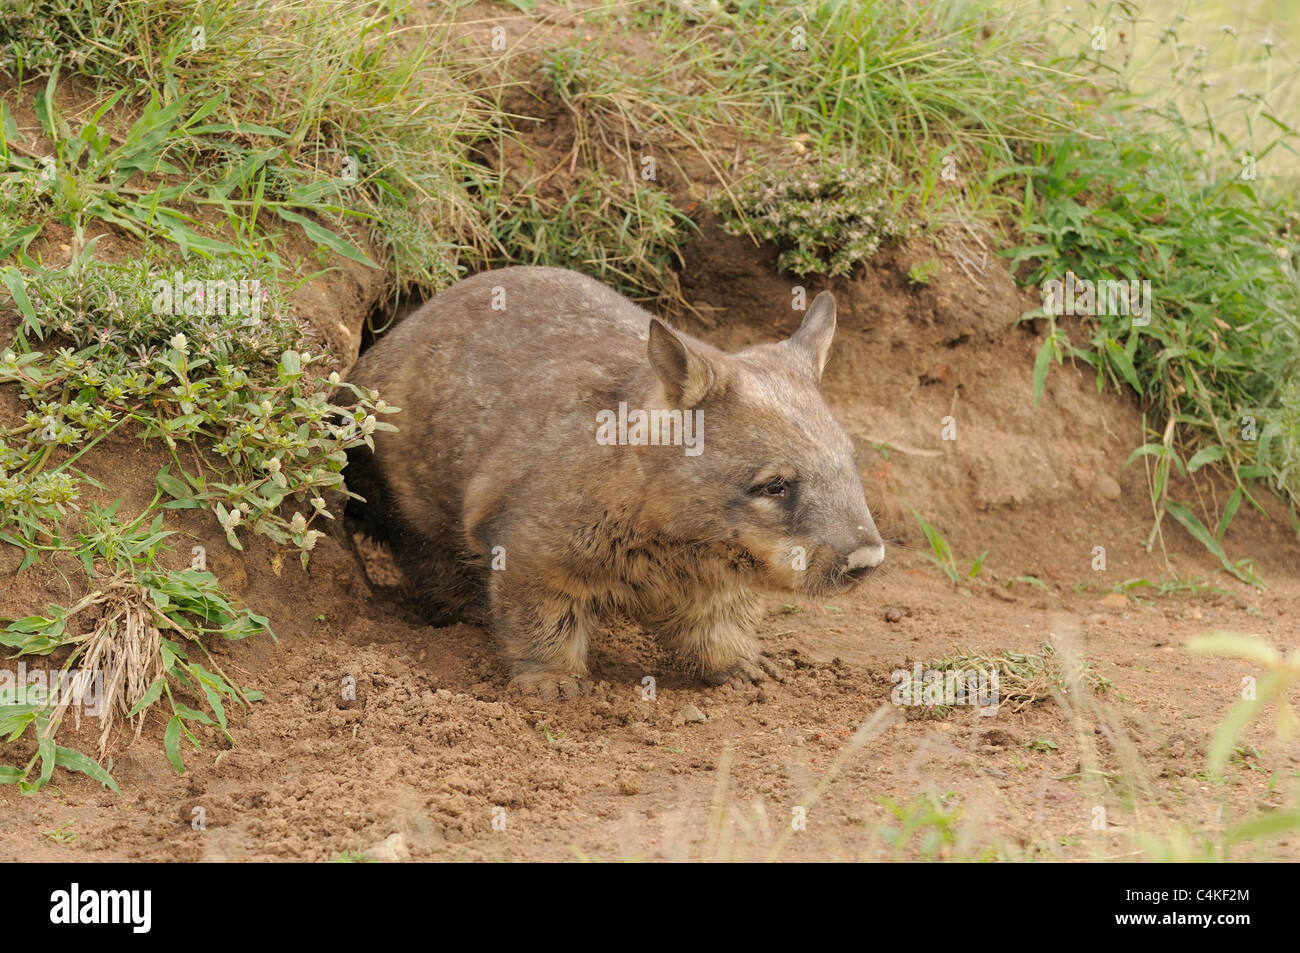 Southern Hairy-nosed Wombat Lasiorhinus latifrons Adult at burrow entrance . Captive. Photographed in Queensland, Australia Stock Photo